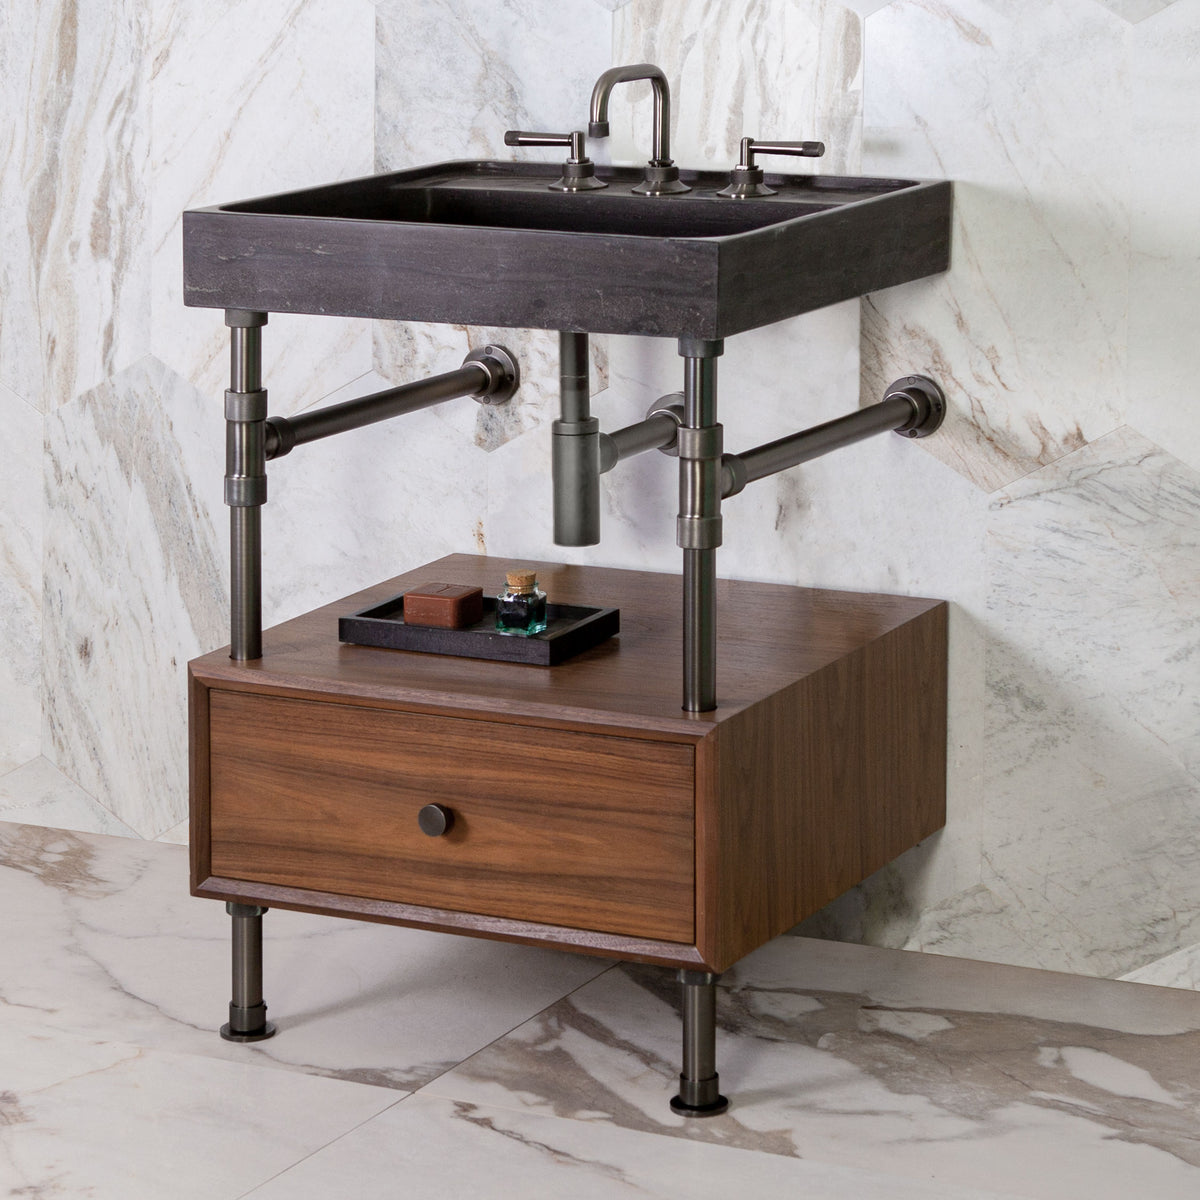 Ventus Bath Sink with Faucet Deck paired with Elemental Classic Drawer Vanity image 1 of 3